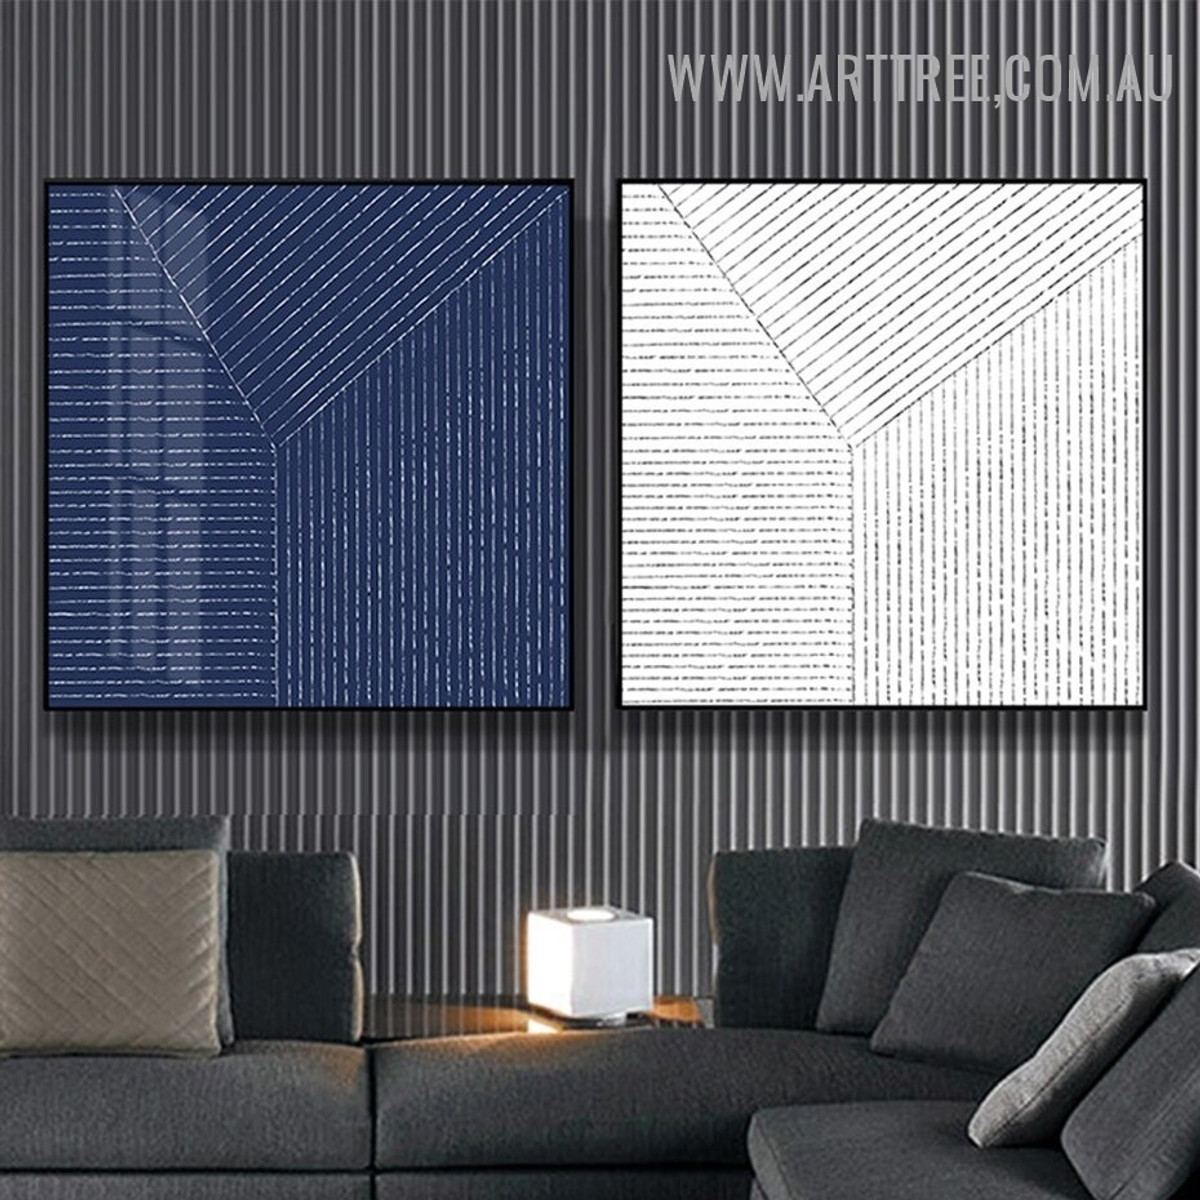 Alignment Vertical Lines 2 Piece Contemporary Picture Abstract Geometrical Art Canvas Print for Room Wall Trimming